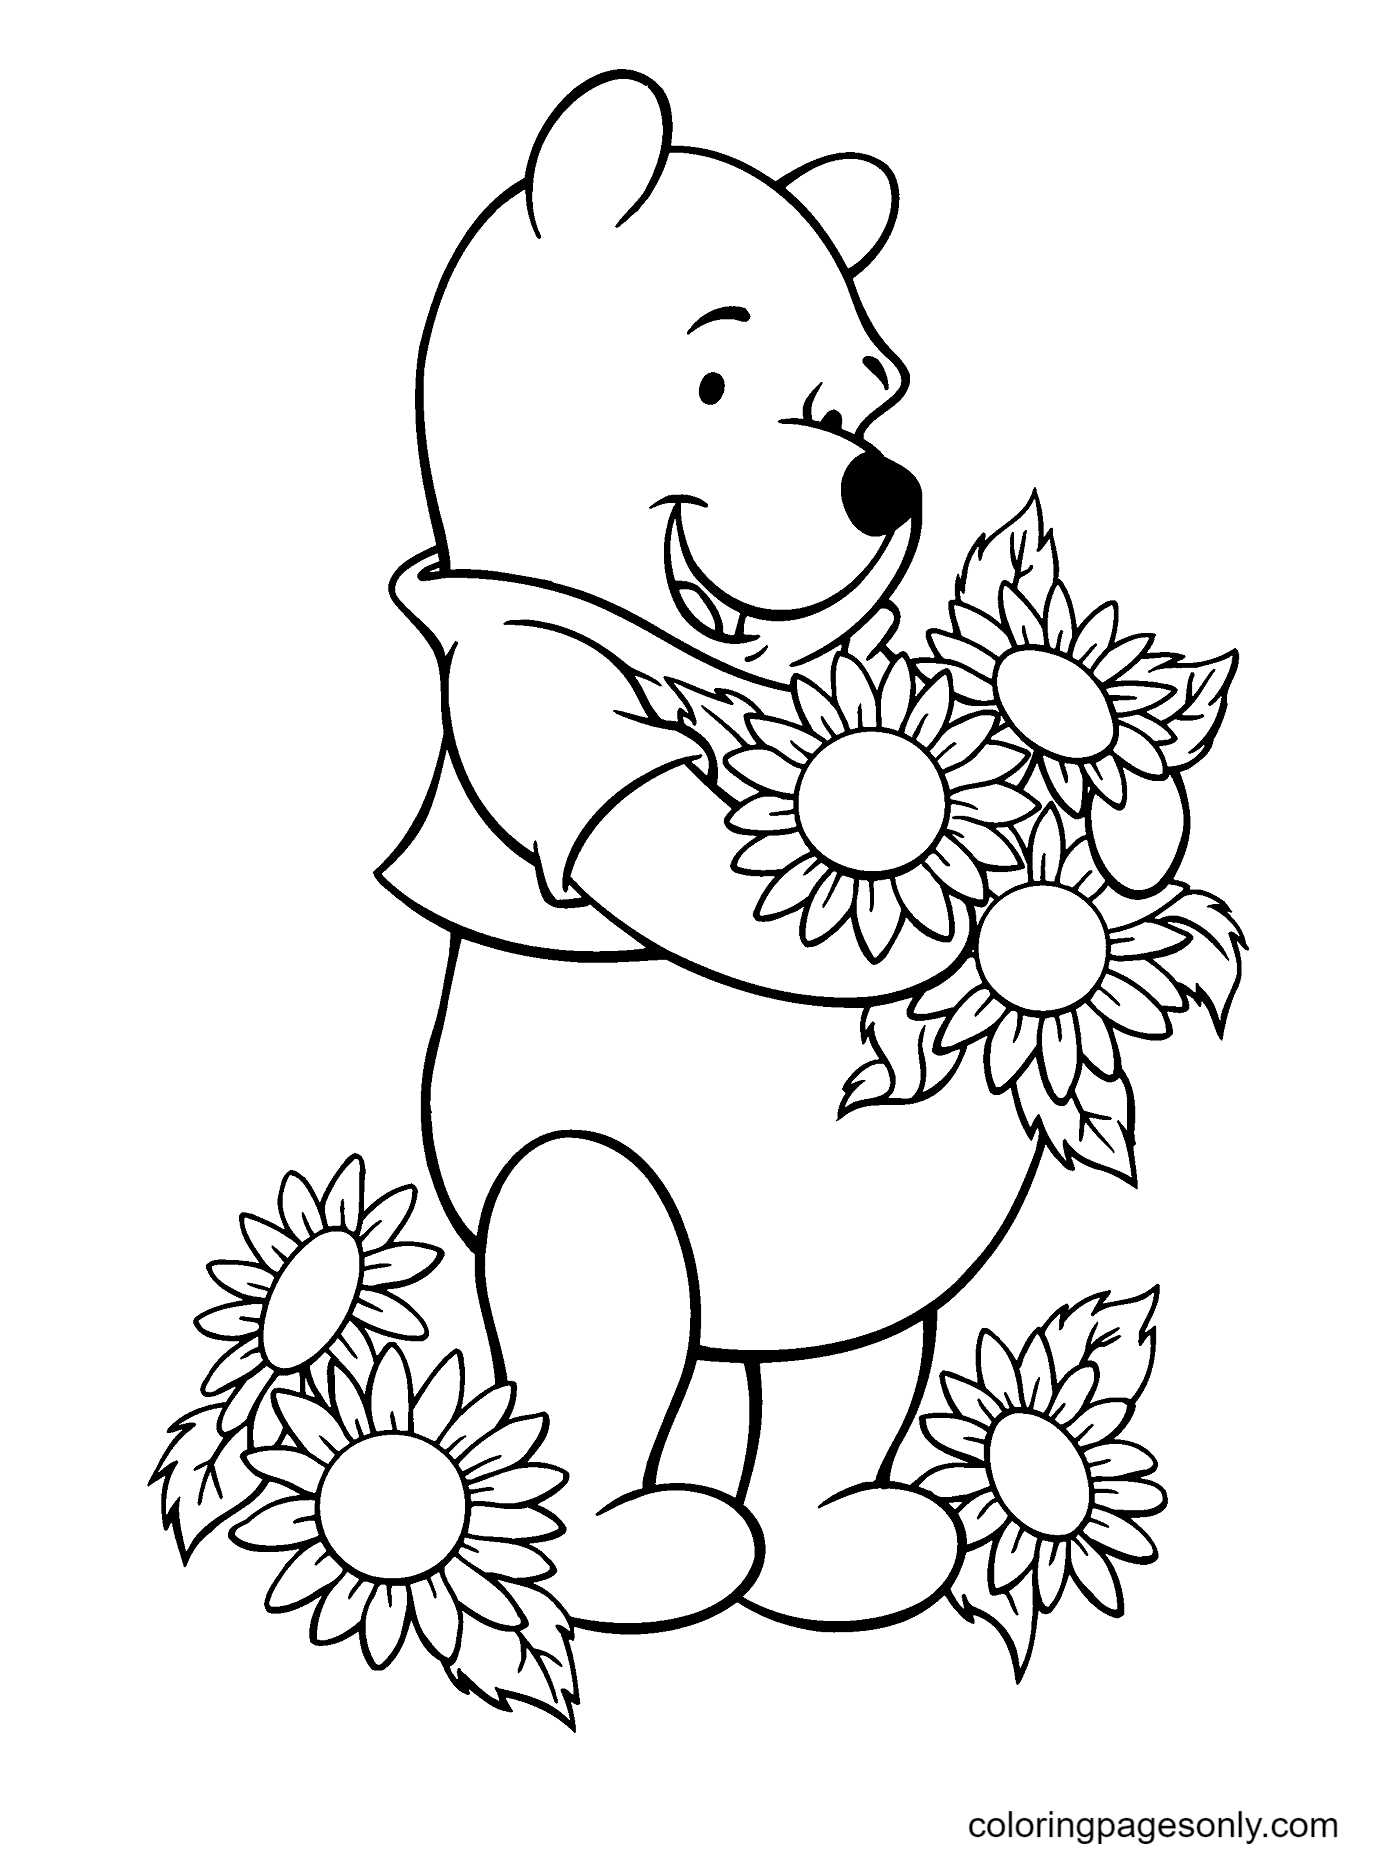 Pooh Loves Flowers Coloring Pages   Winnie The Pooh Coloring Pages ...